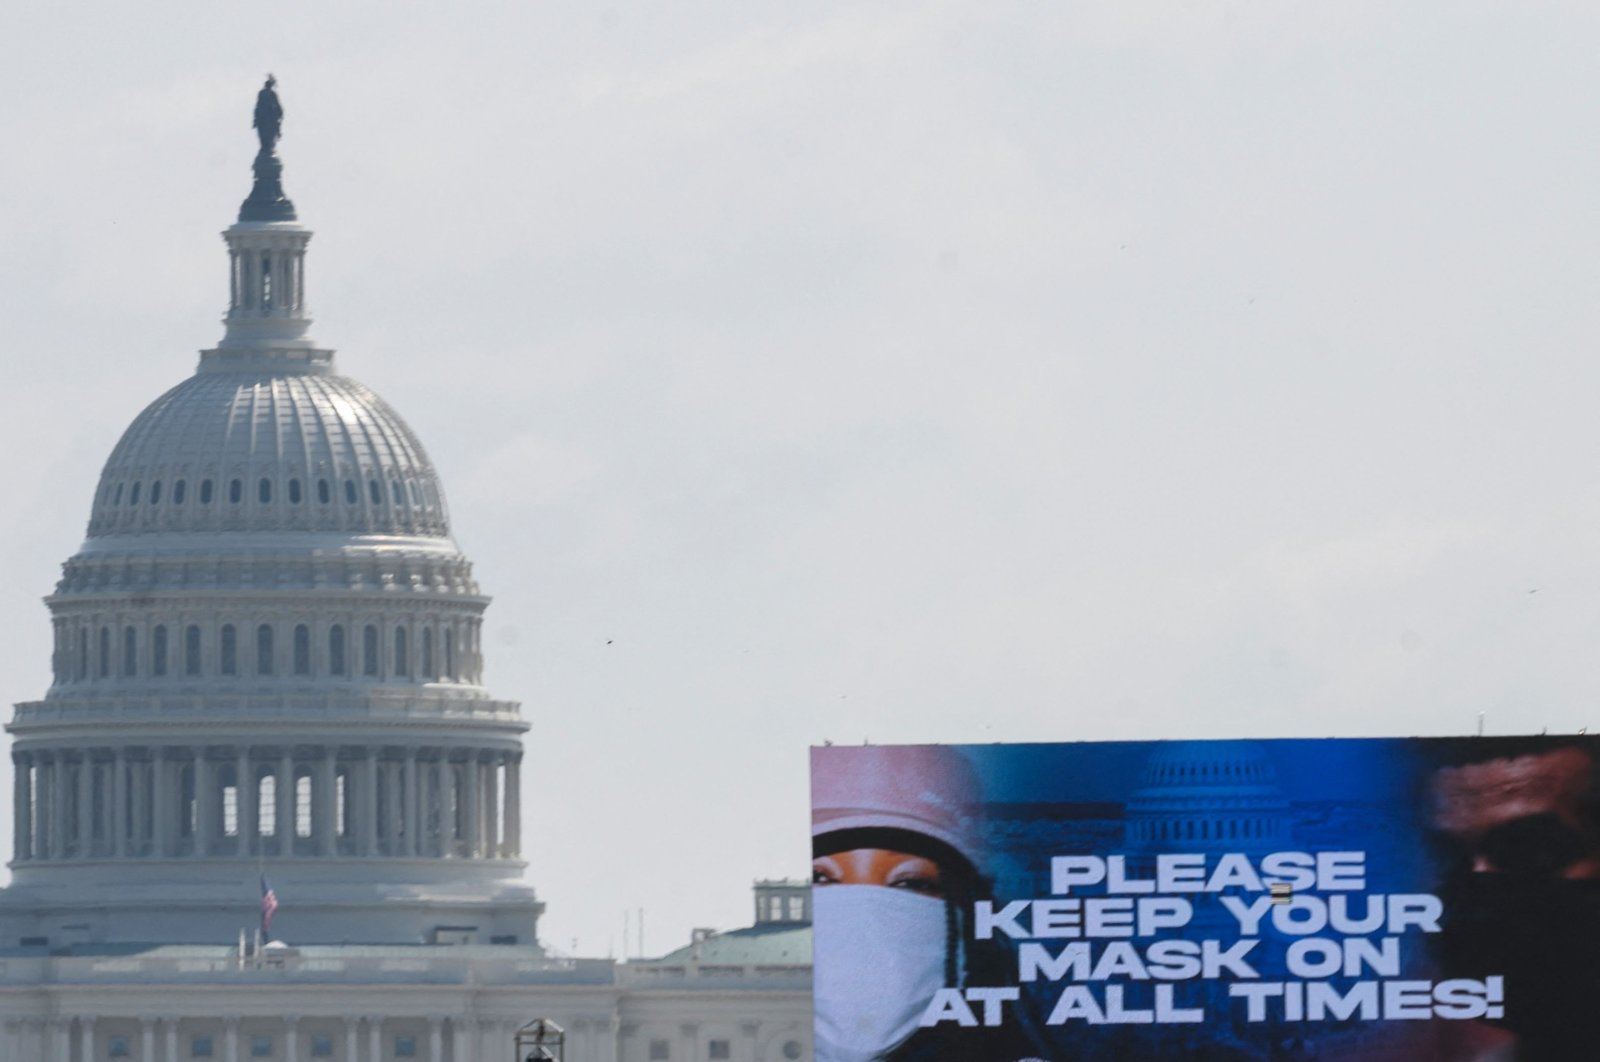 A sign advocating for mask wearing to protect against COVID-19 on the National Mall with the U.S. Capitol in the background is seen in Washington, D.C., Aug. 28, 2021. (AFP File Photo)